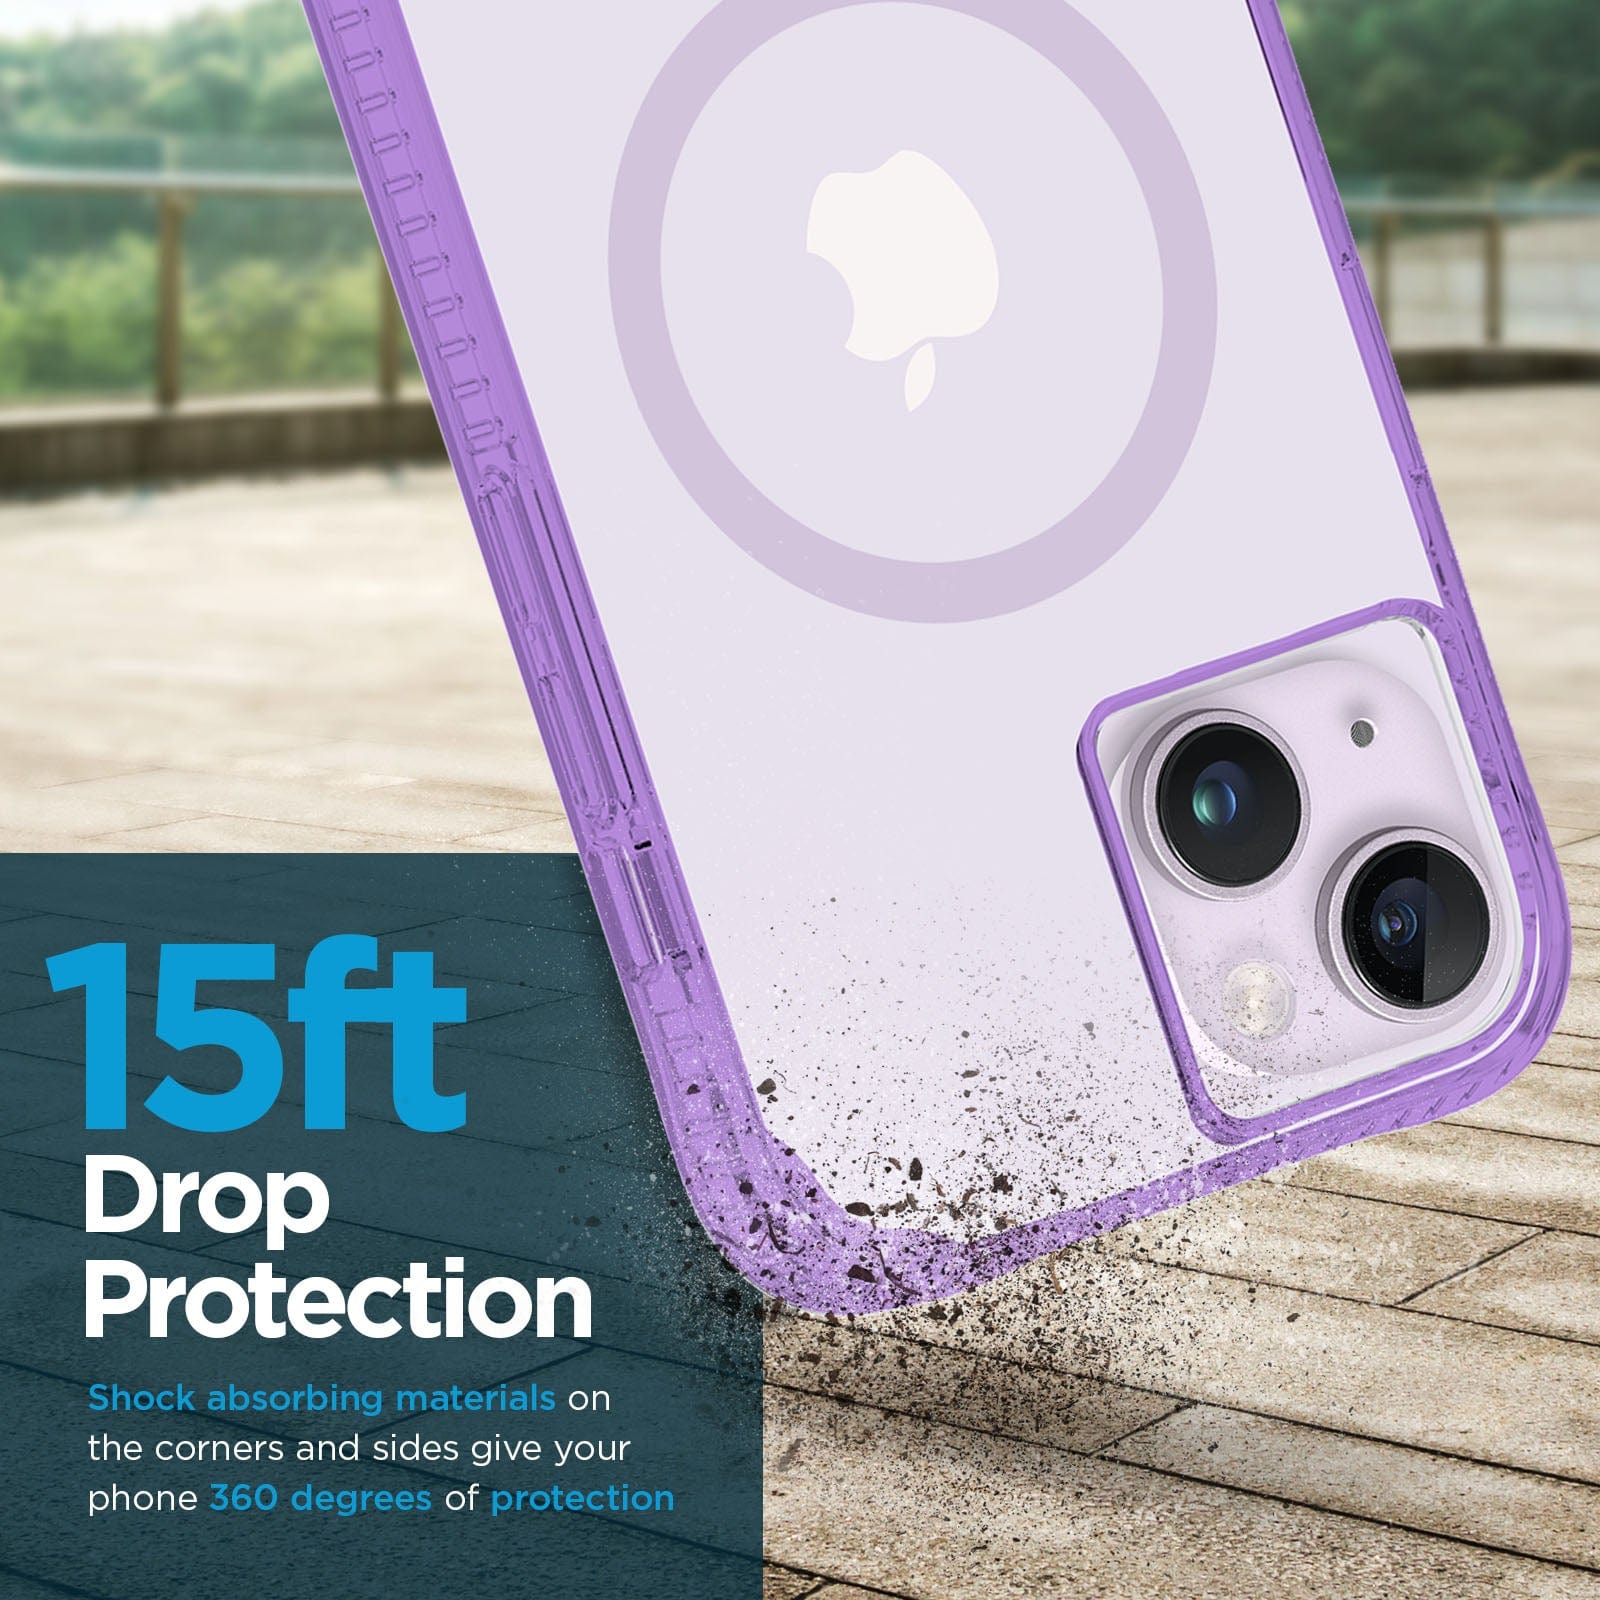 15ft Drop Protection. Shock absorbing  materials on the corners and sides give your phone 360 degrees of protection.